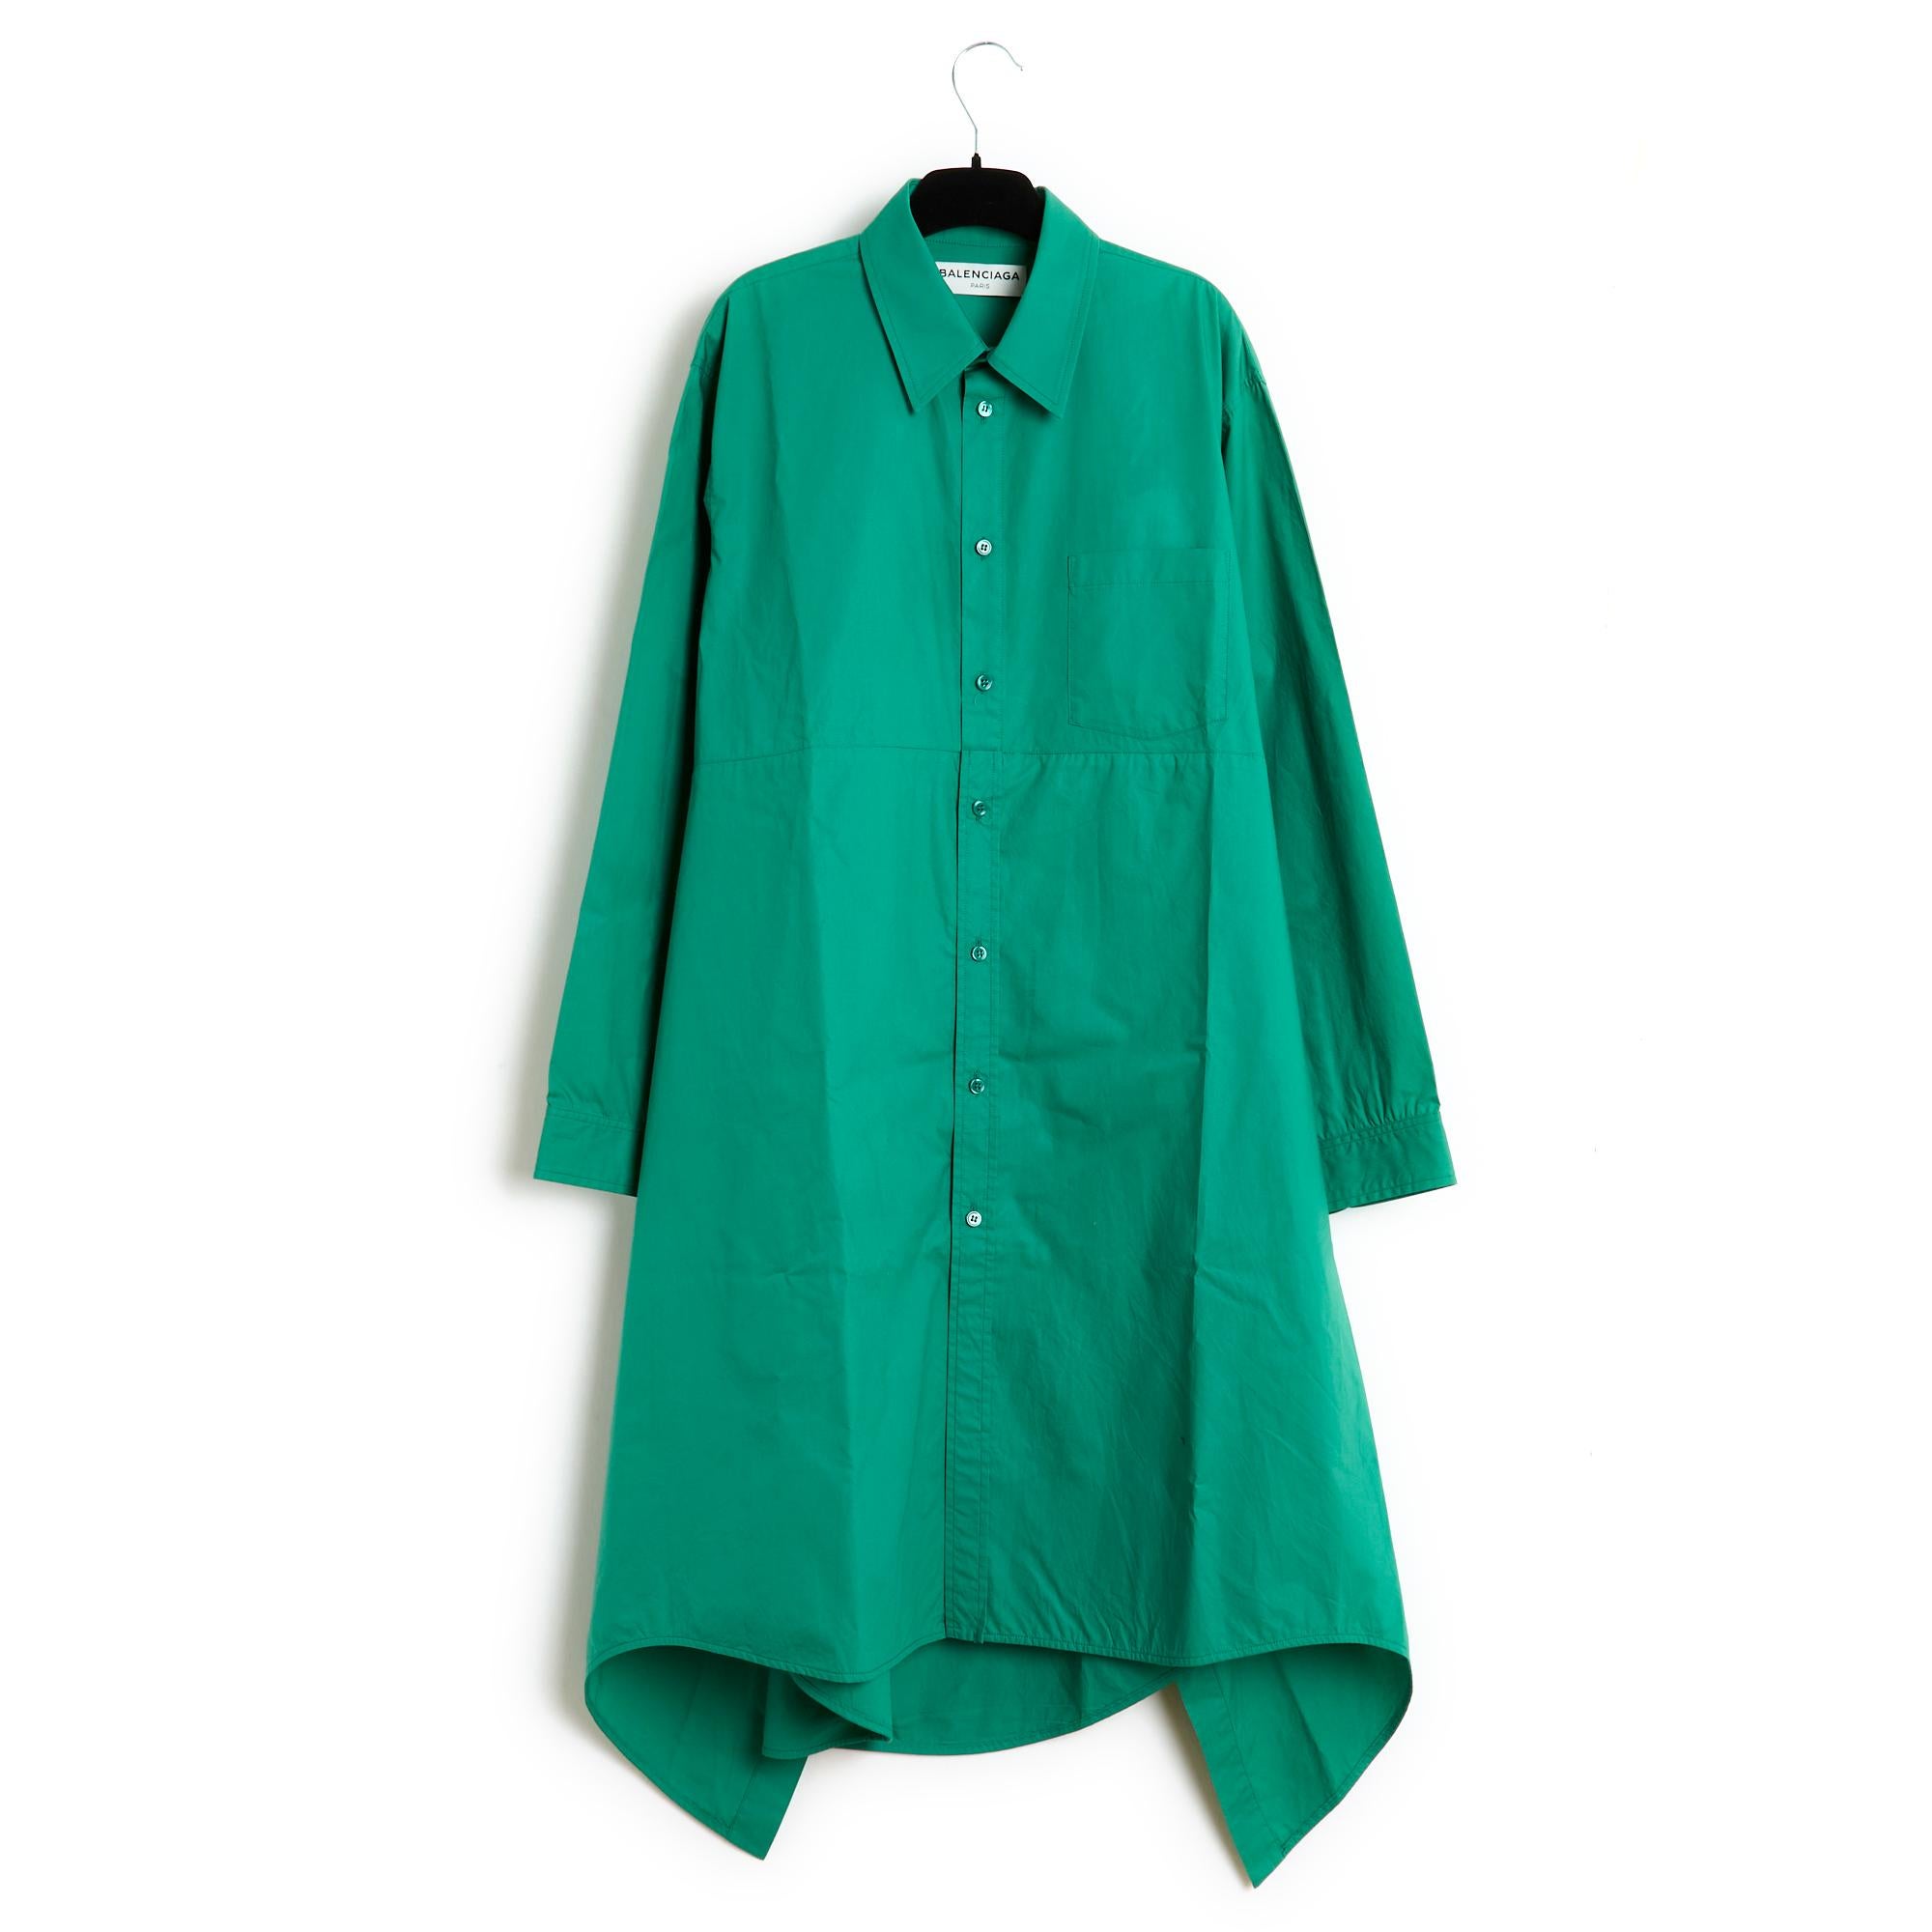 Balenciaga dress from 2016 in green cotton cloth, oversized volume, flared cut, shirt collar, buttoned all the way in front, overskirt in the same fabric, closed in front with the same series of buttons and closed, or not, at the back with a button,